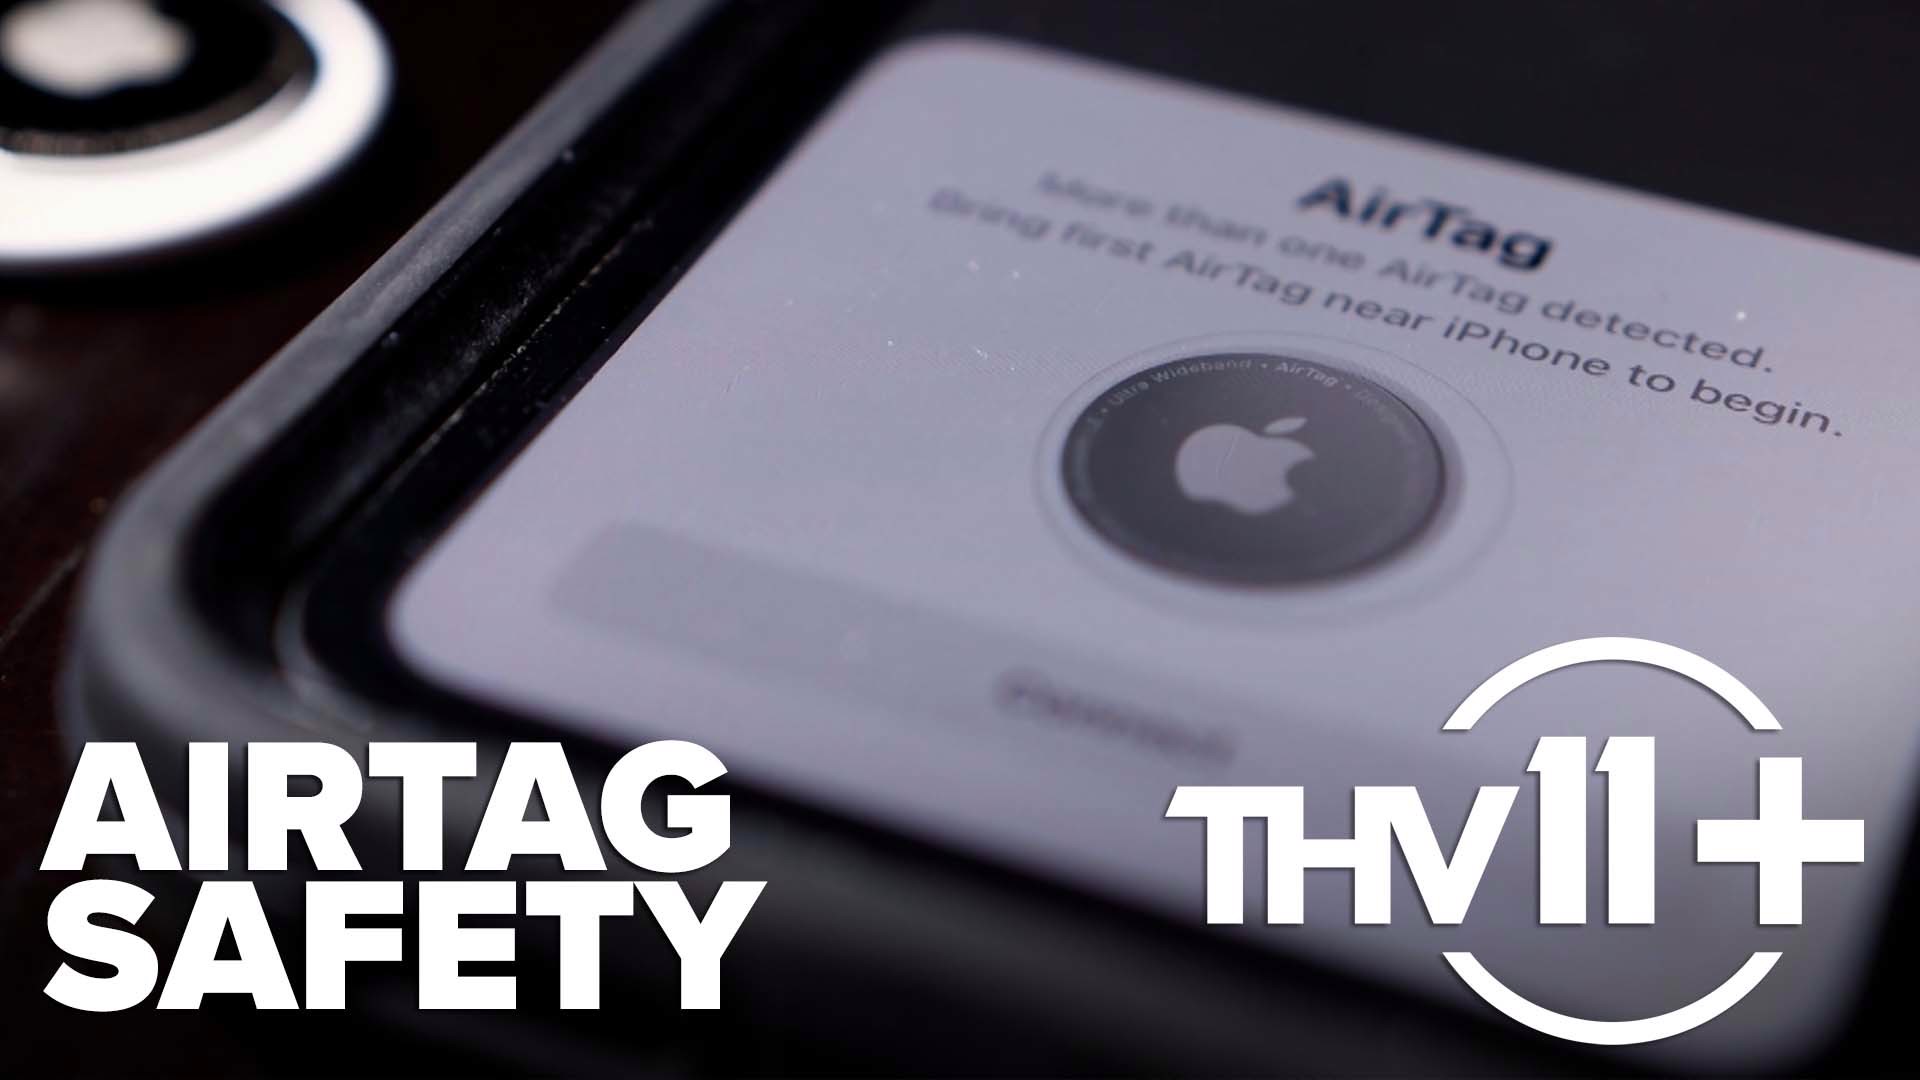 Ashley Godwin looked into the pro and cons of Apple AirTags and spoke to one woman who was allegedly being stalked by someone using one.